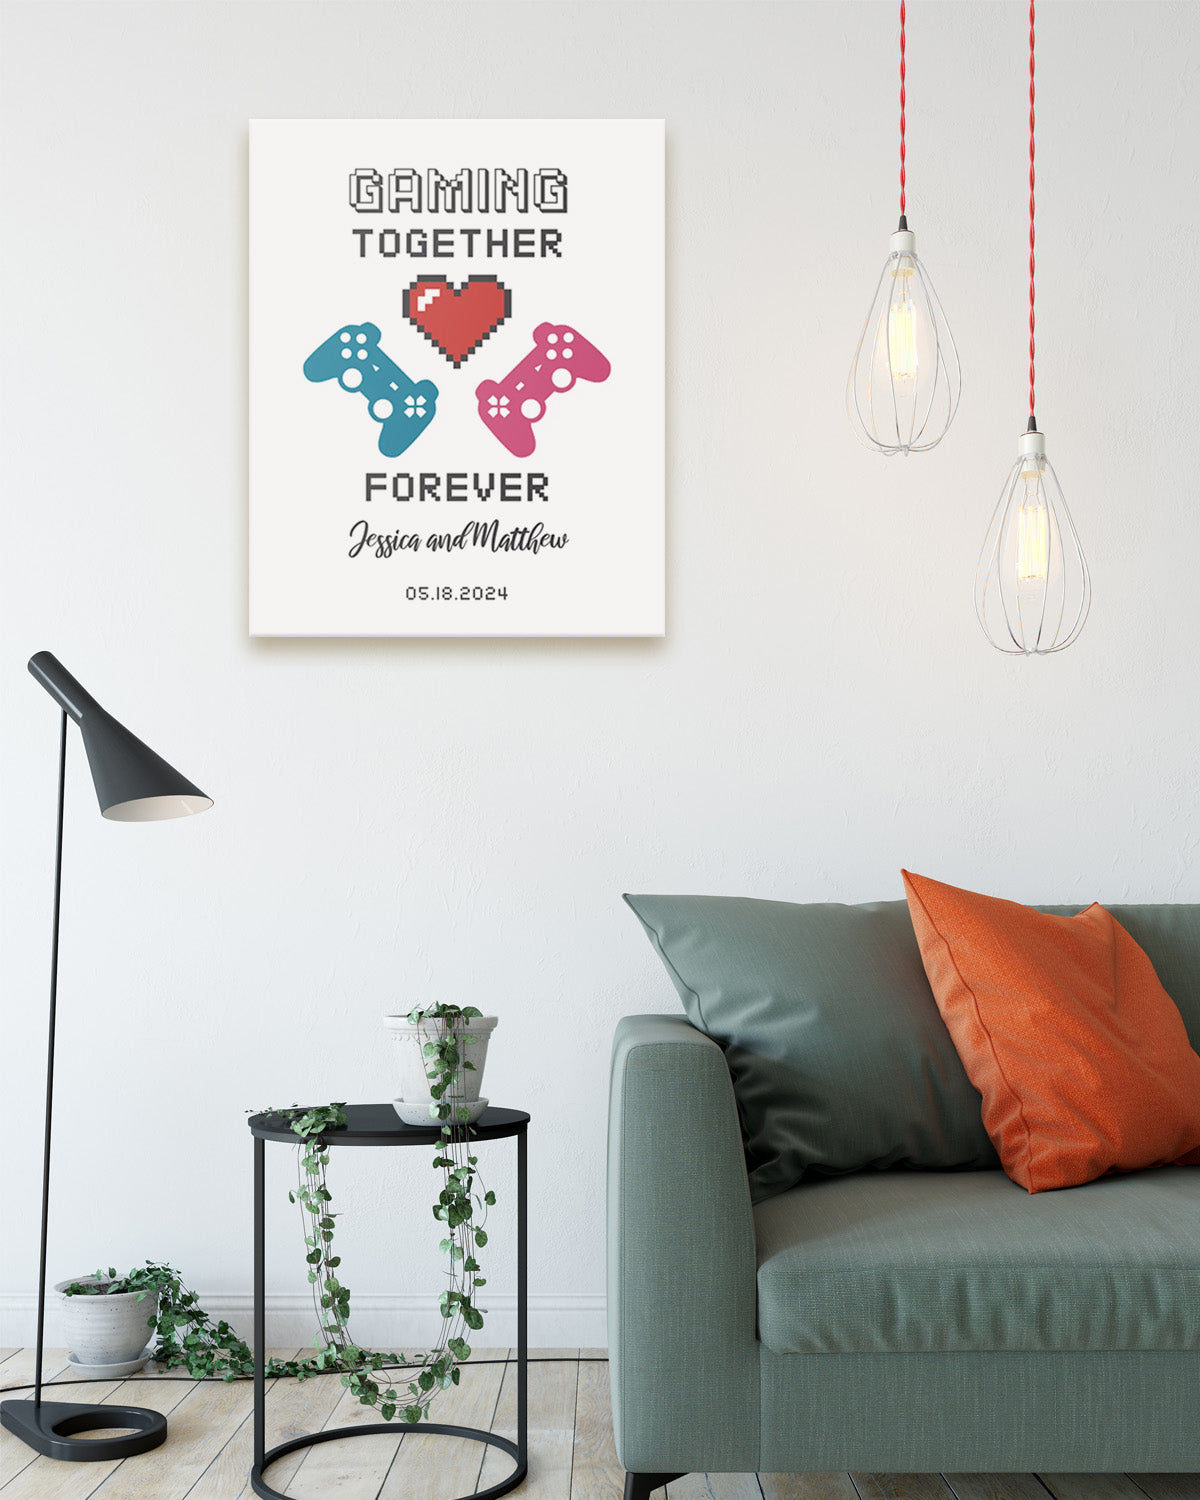 Gaming Together Forever - Customizable Wall Decor Canvas Art for gamers - Great gift for a wedding or anniversary